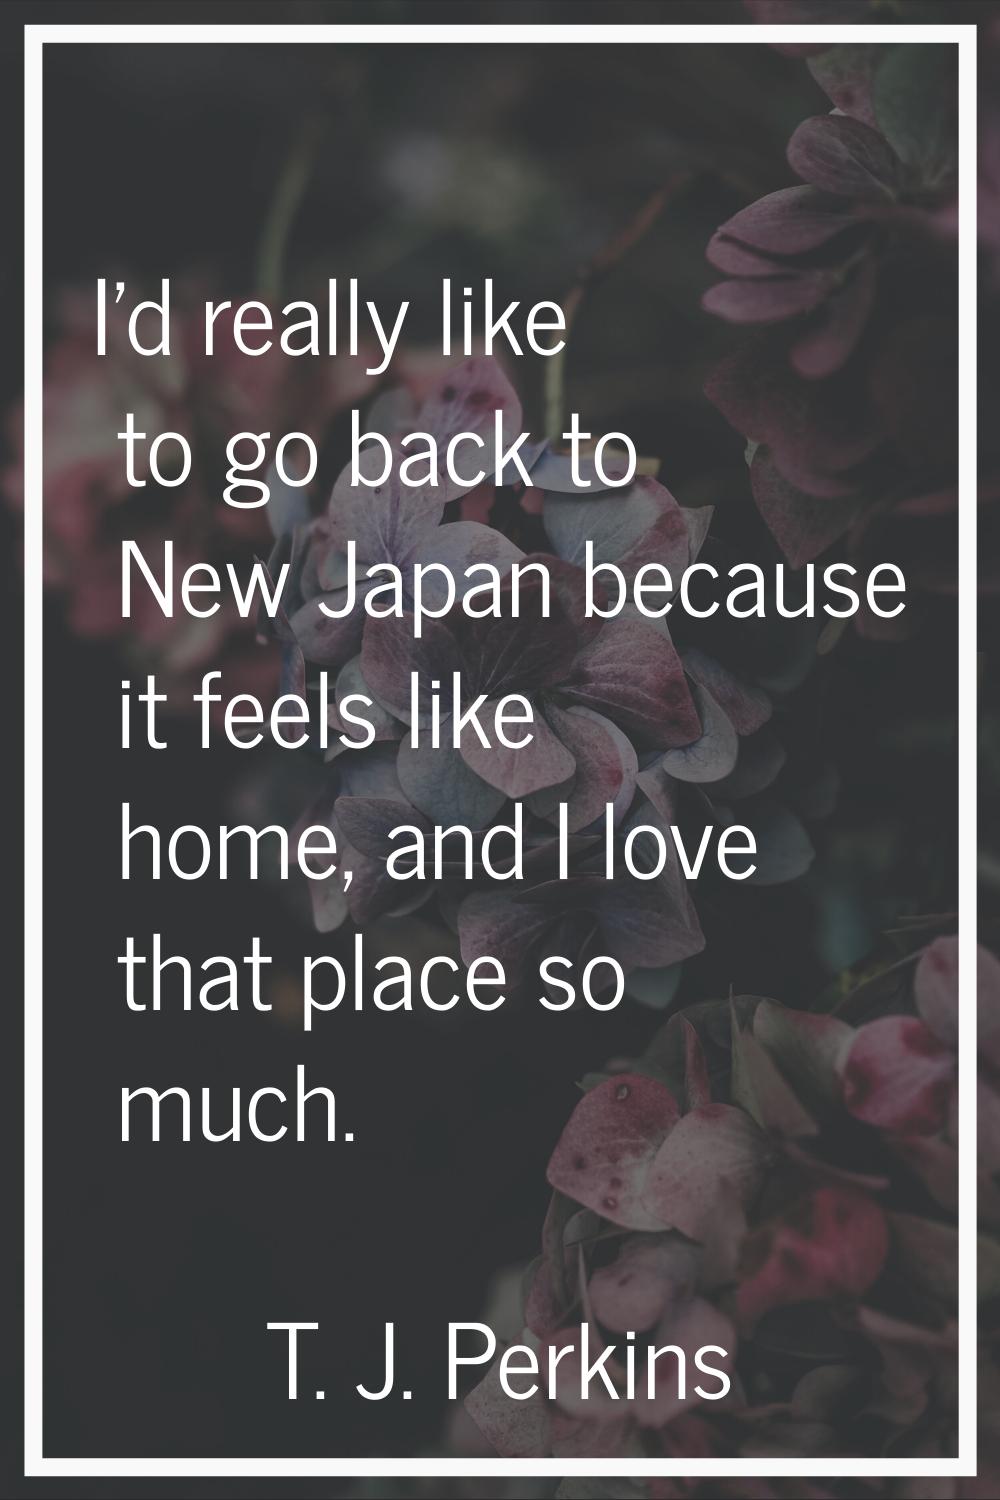 I'd really like to go back to New Japan because it feels like home, and I love that place so much.